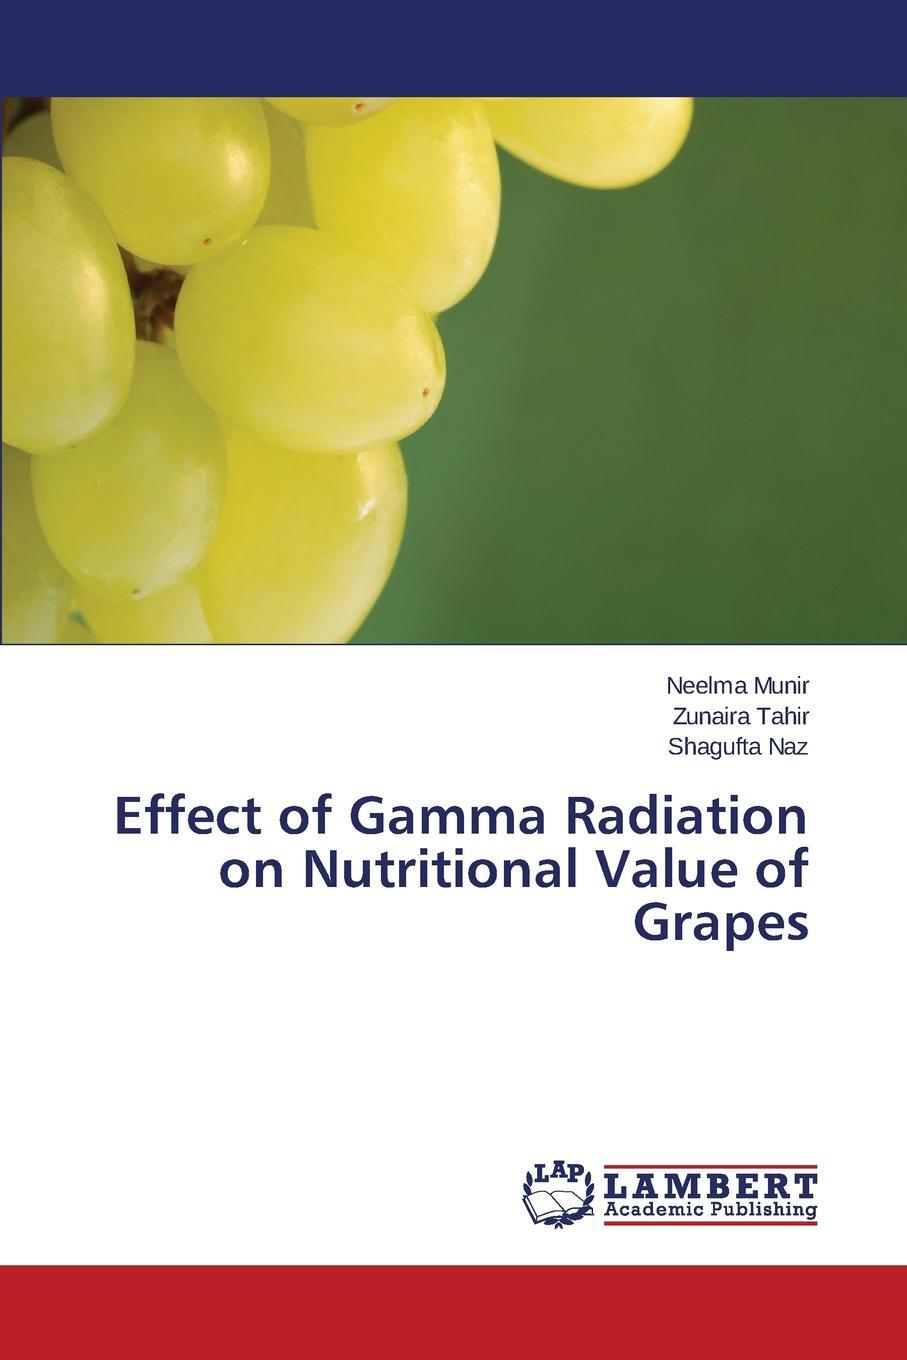 фото Effect of Gamma Radiation on Nutritional Value of Grapes